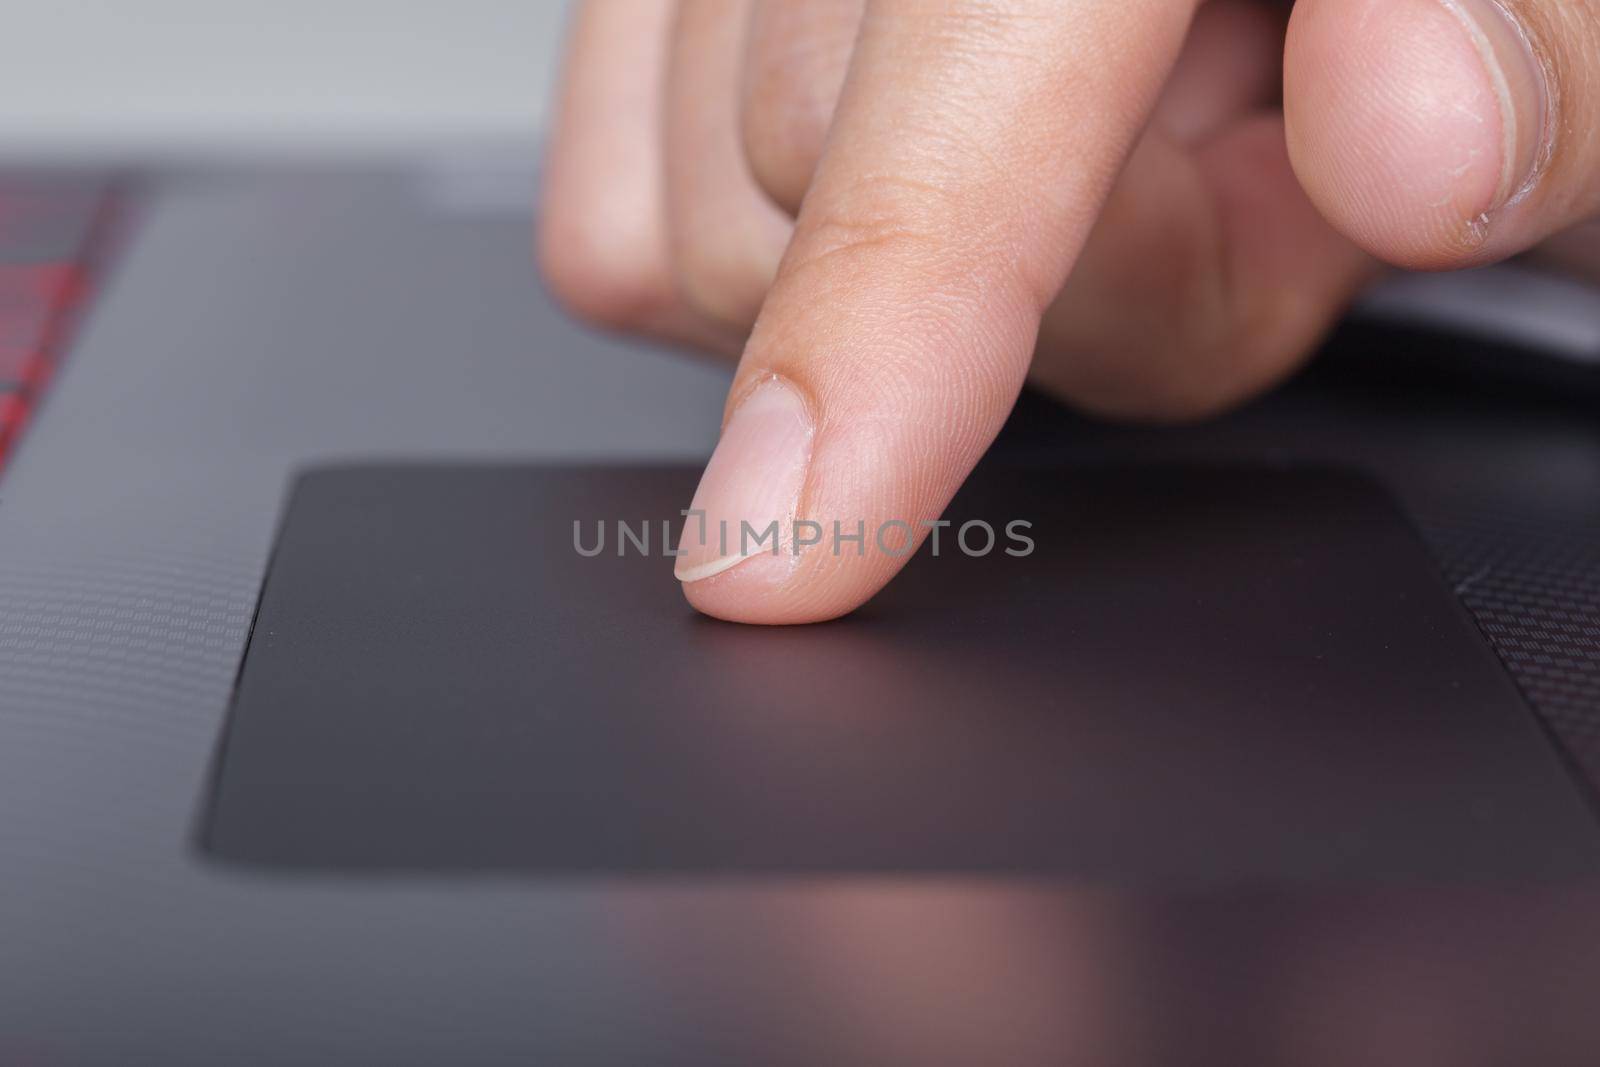 business hand working on a laptop of touchpad